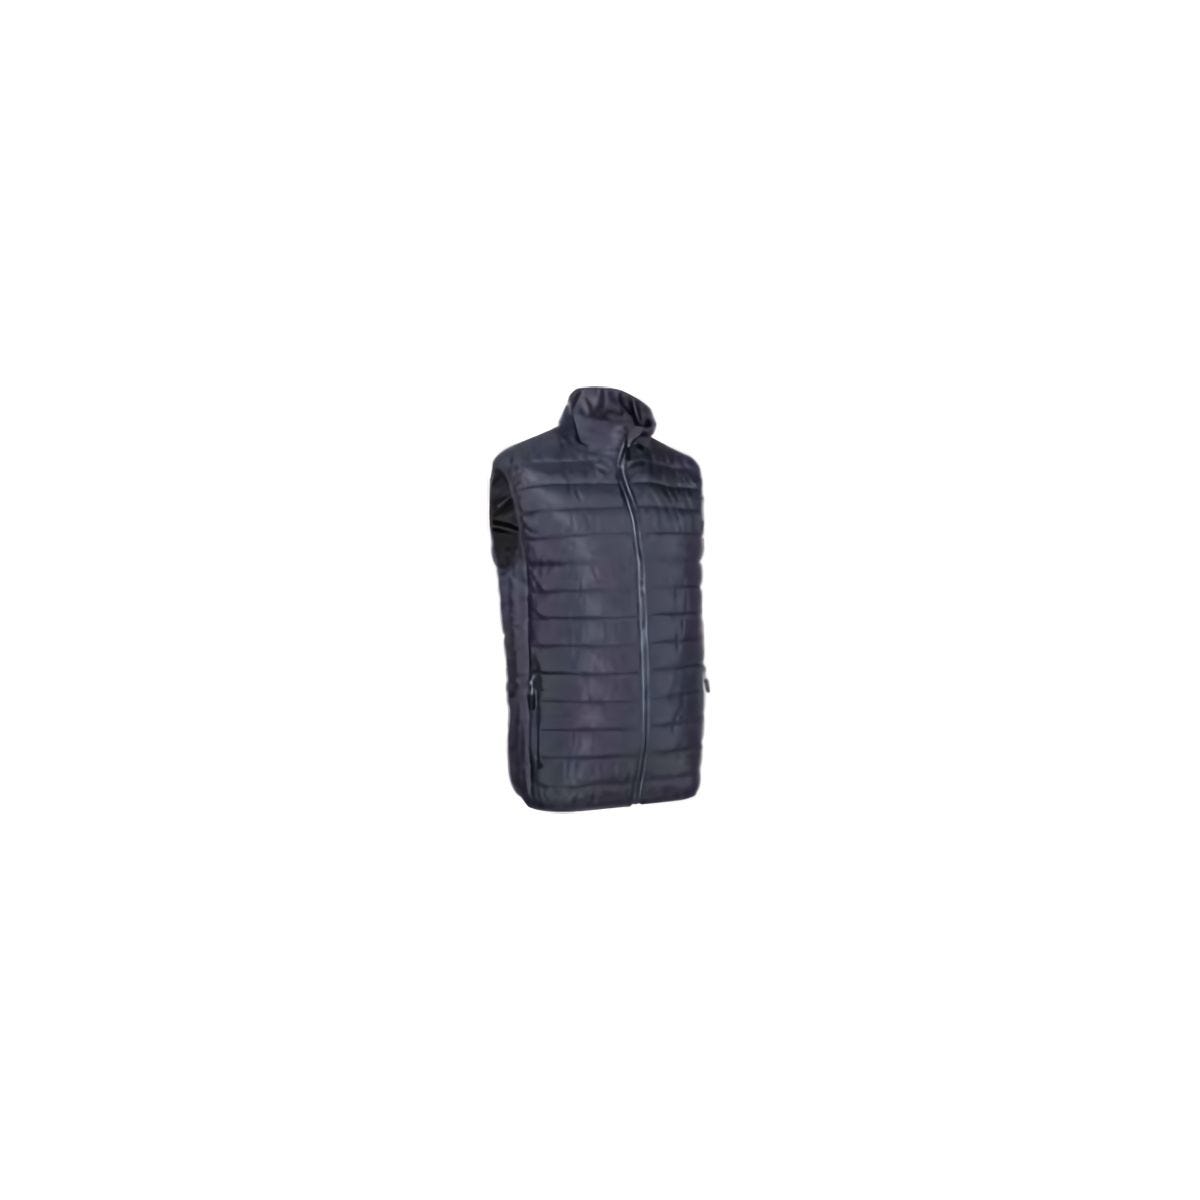 Gilet Kaba gris - Coverguard - Taille S 0